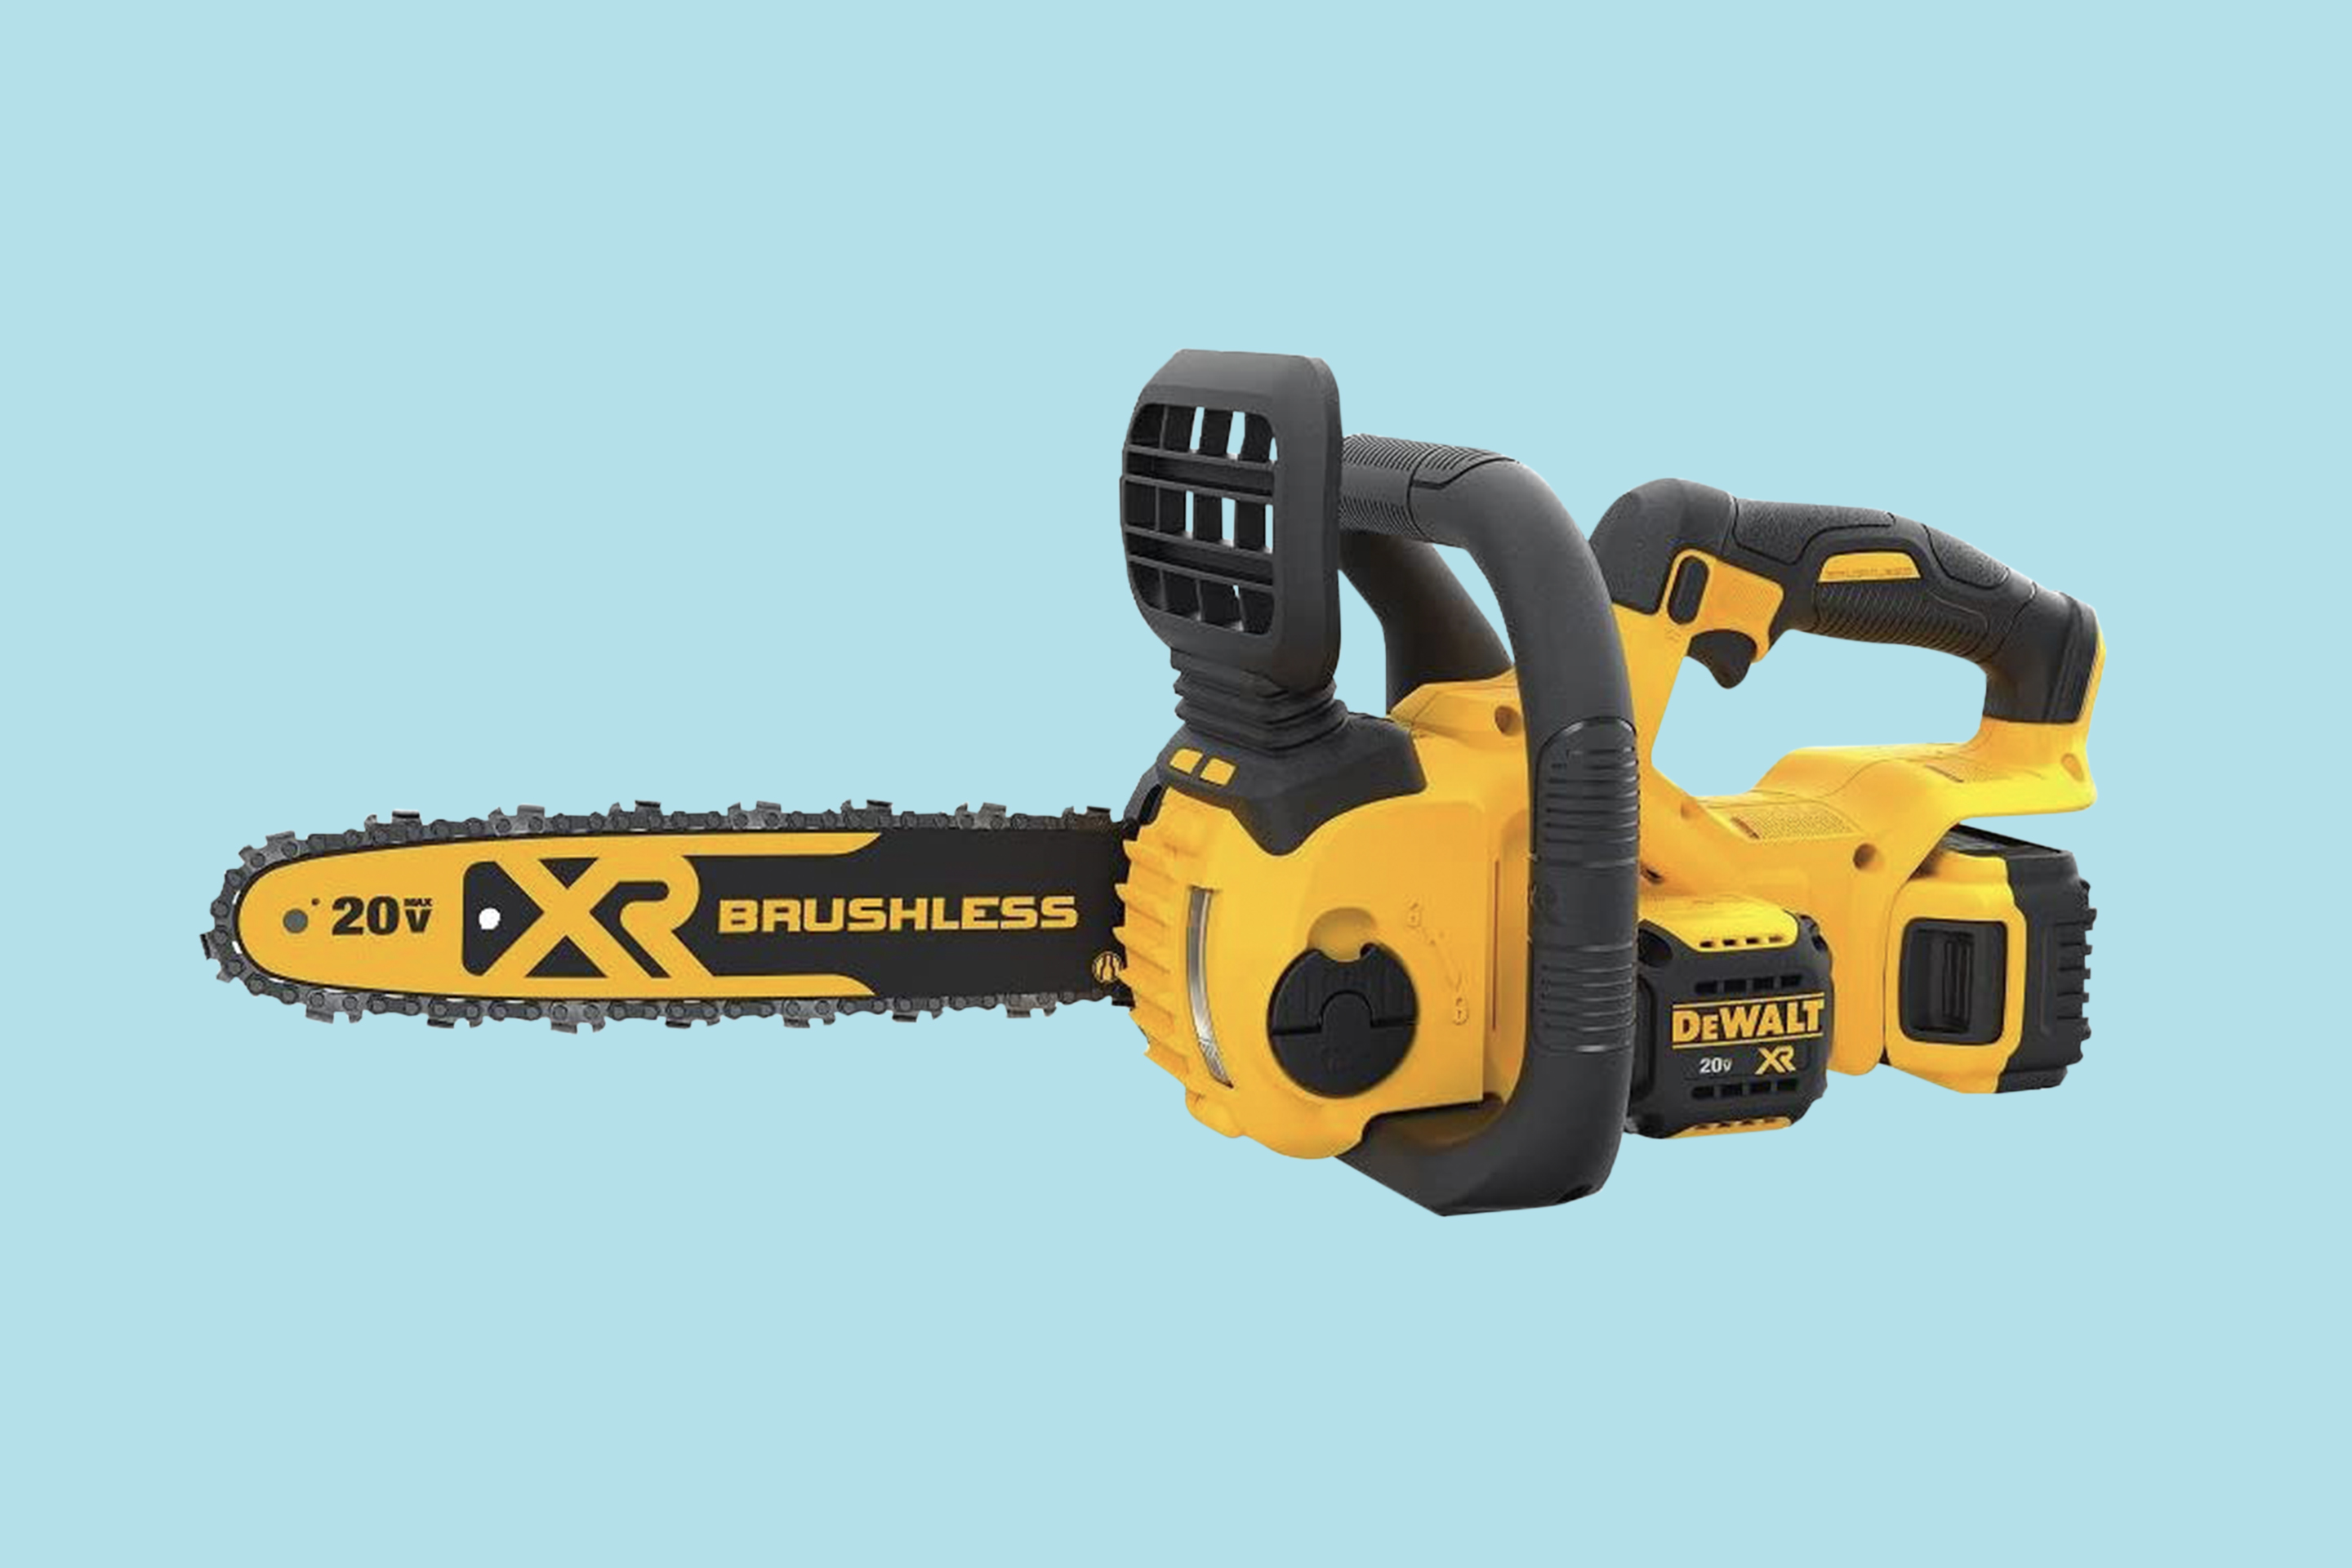 SENDRY Mini Chainsaw 6-Inch, Powerful Cordless Rechargeable Handheld Saw  Review and Demonstration 